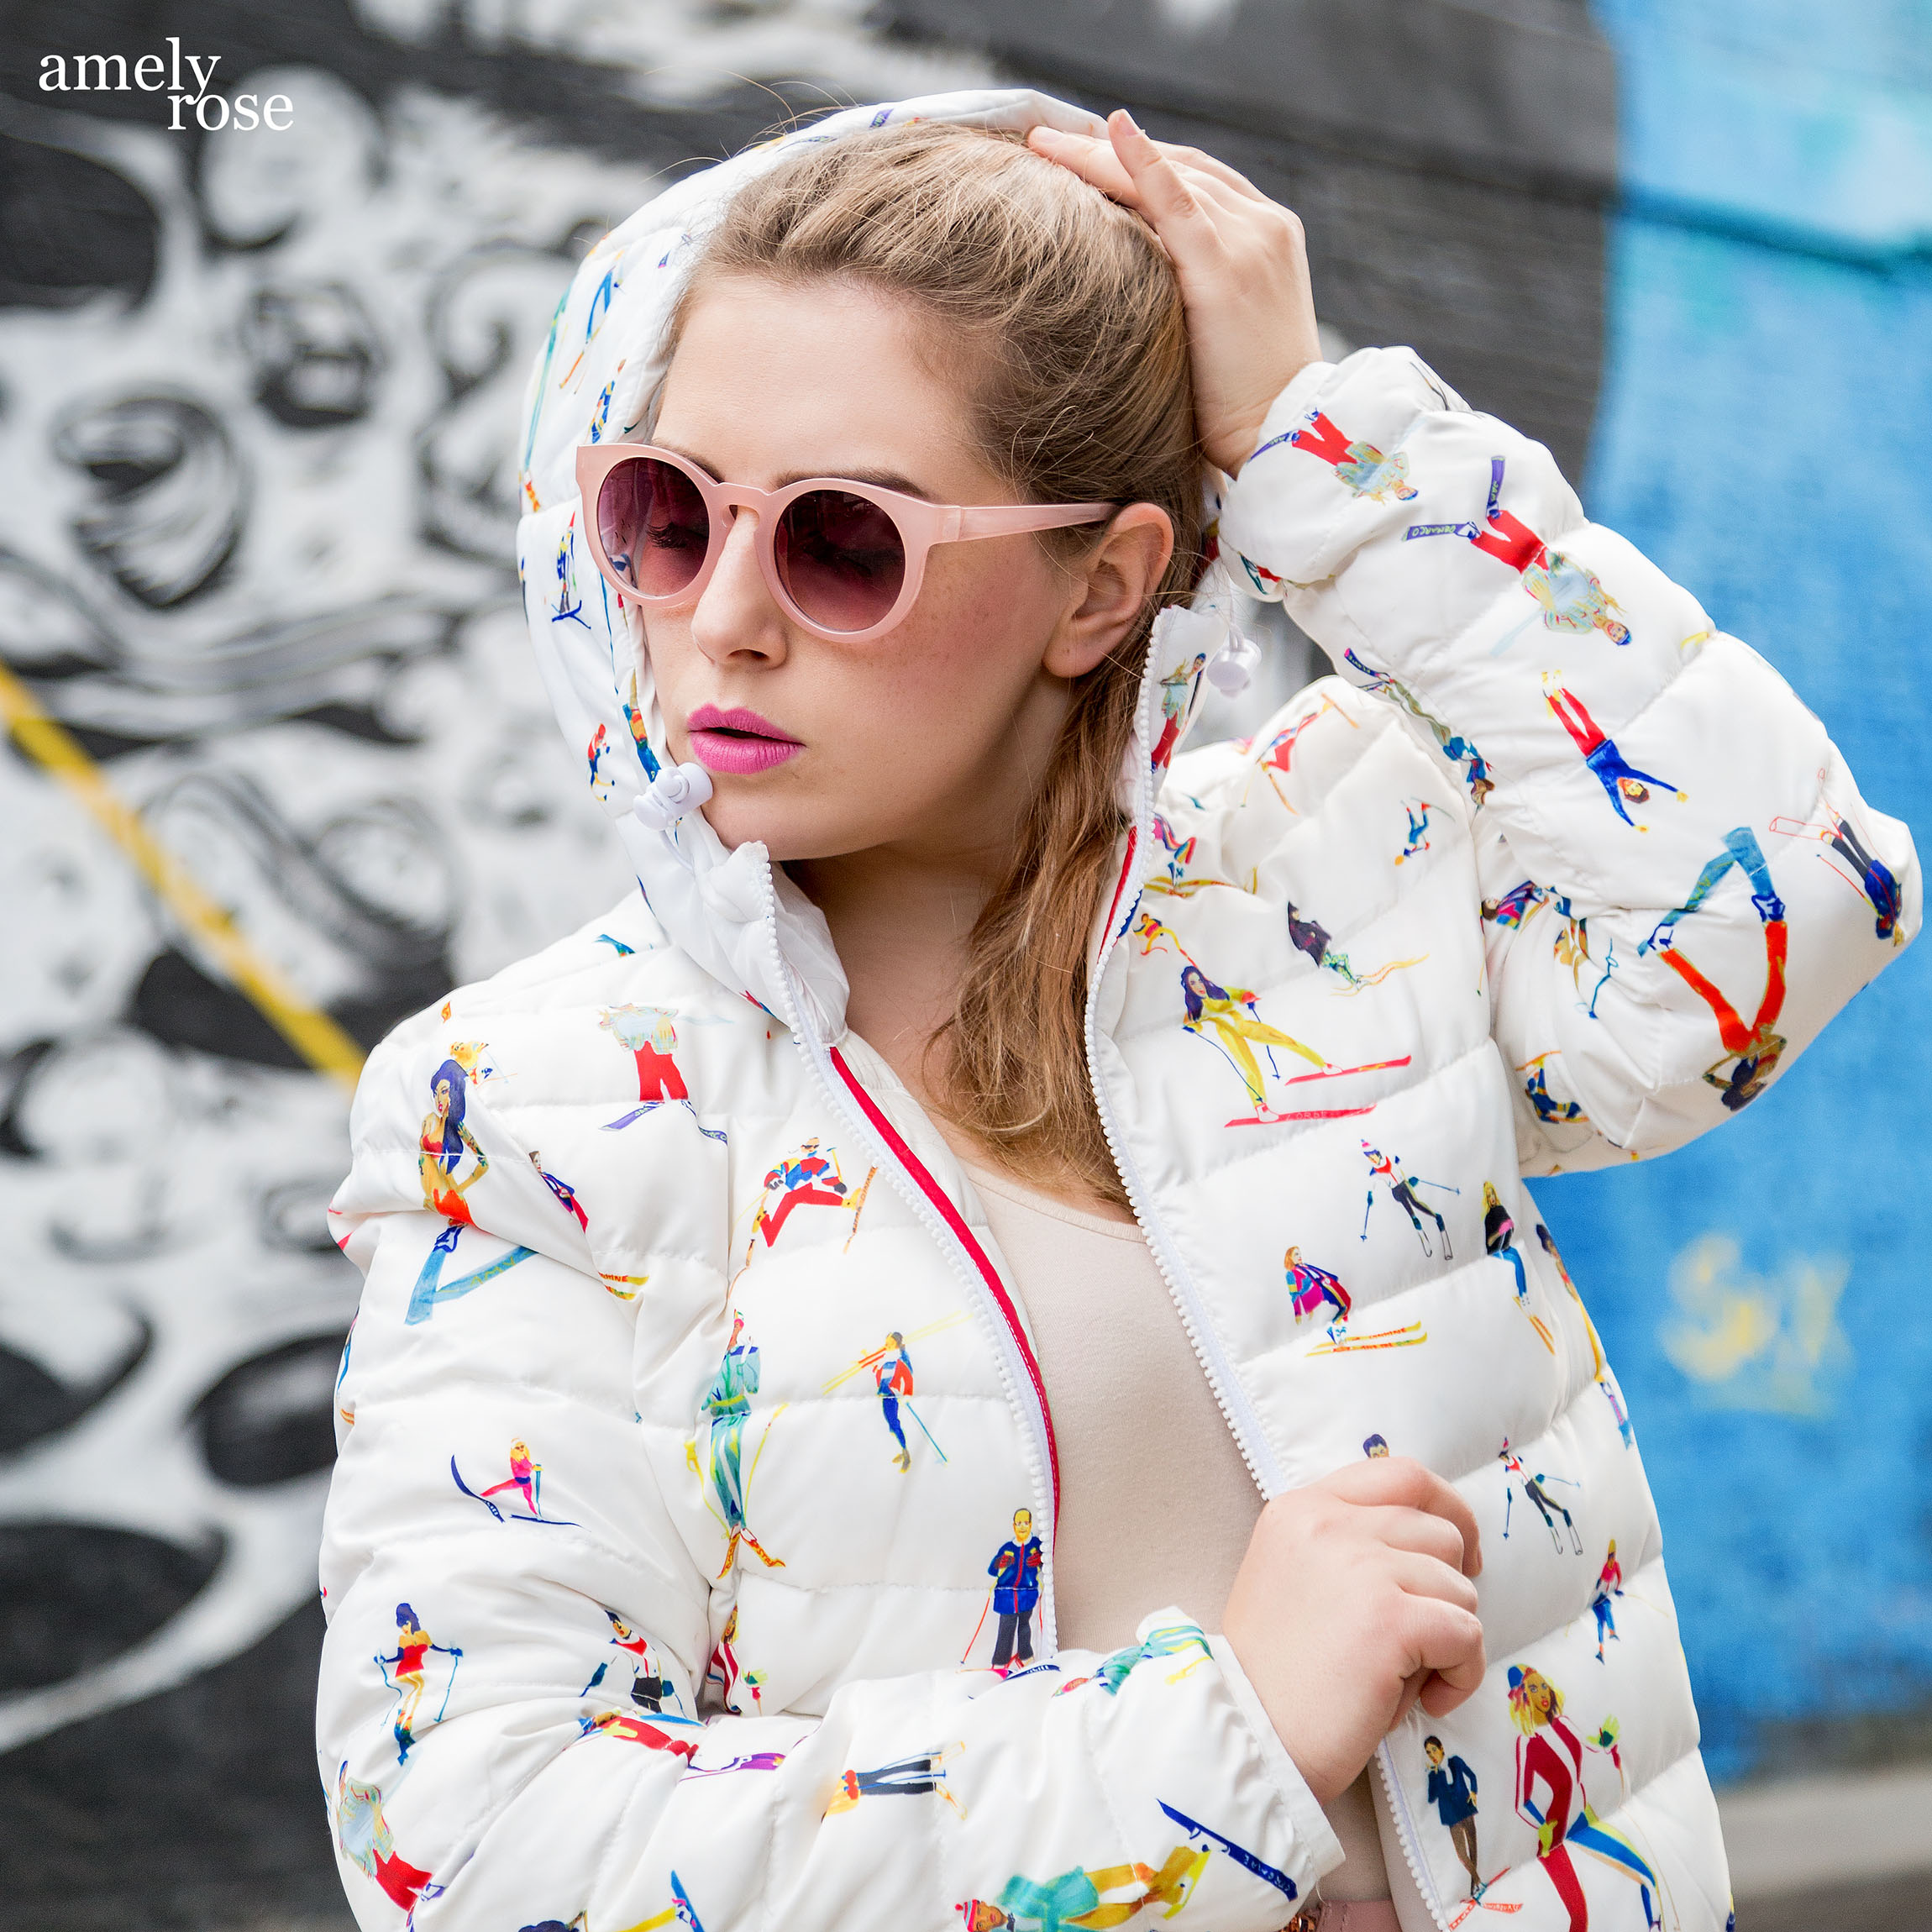 Amely Rose wearing a Designer Jacket infront of a blue Graffiti in London.